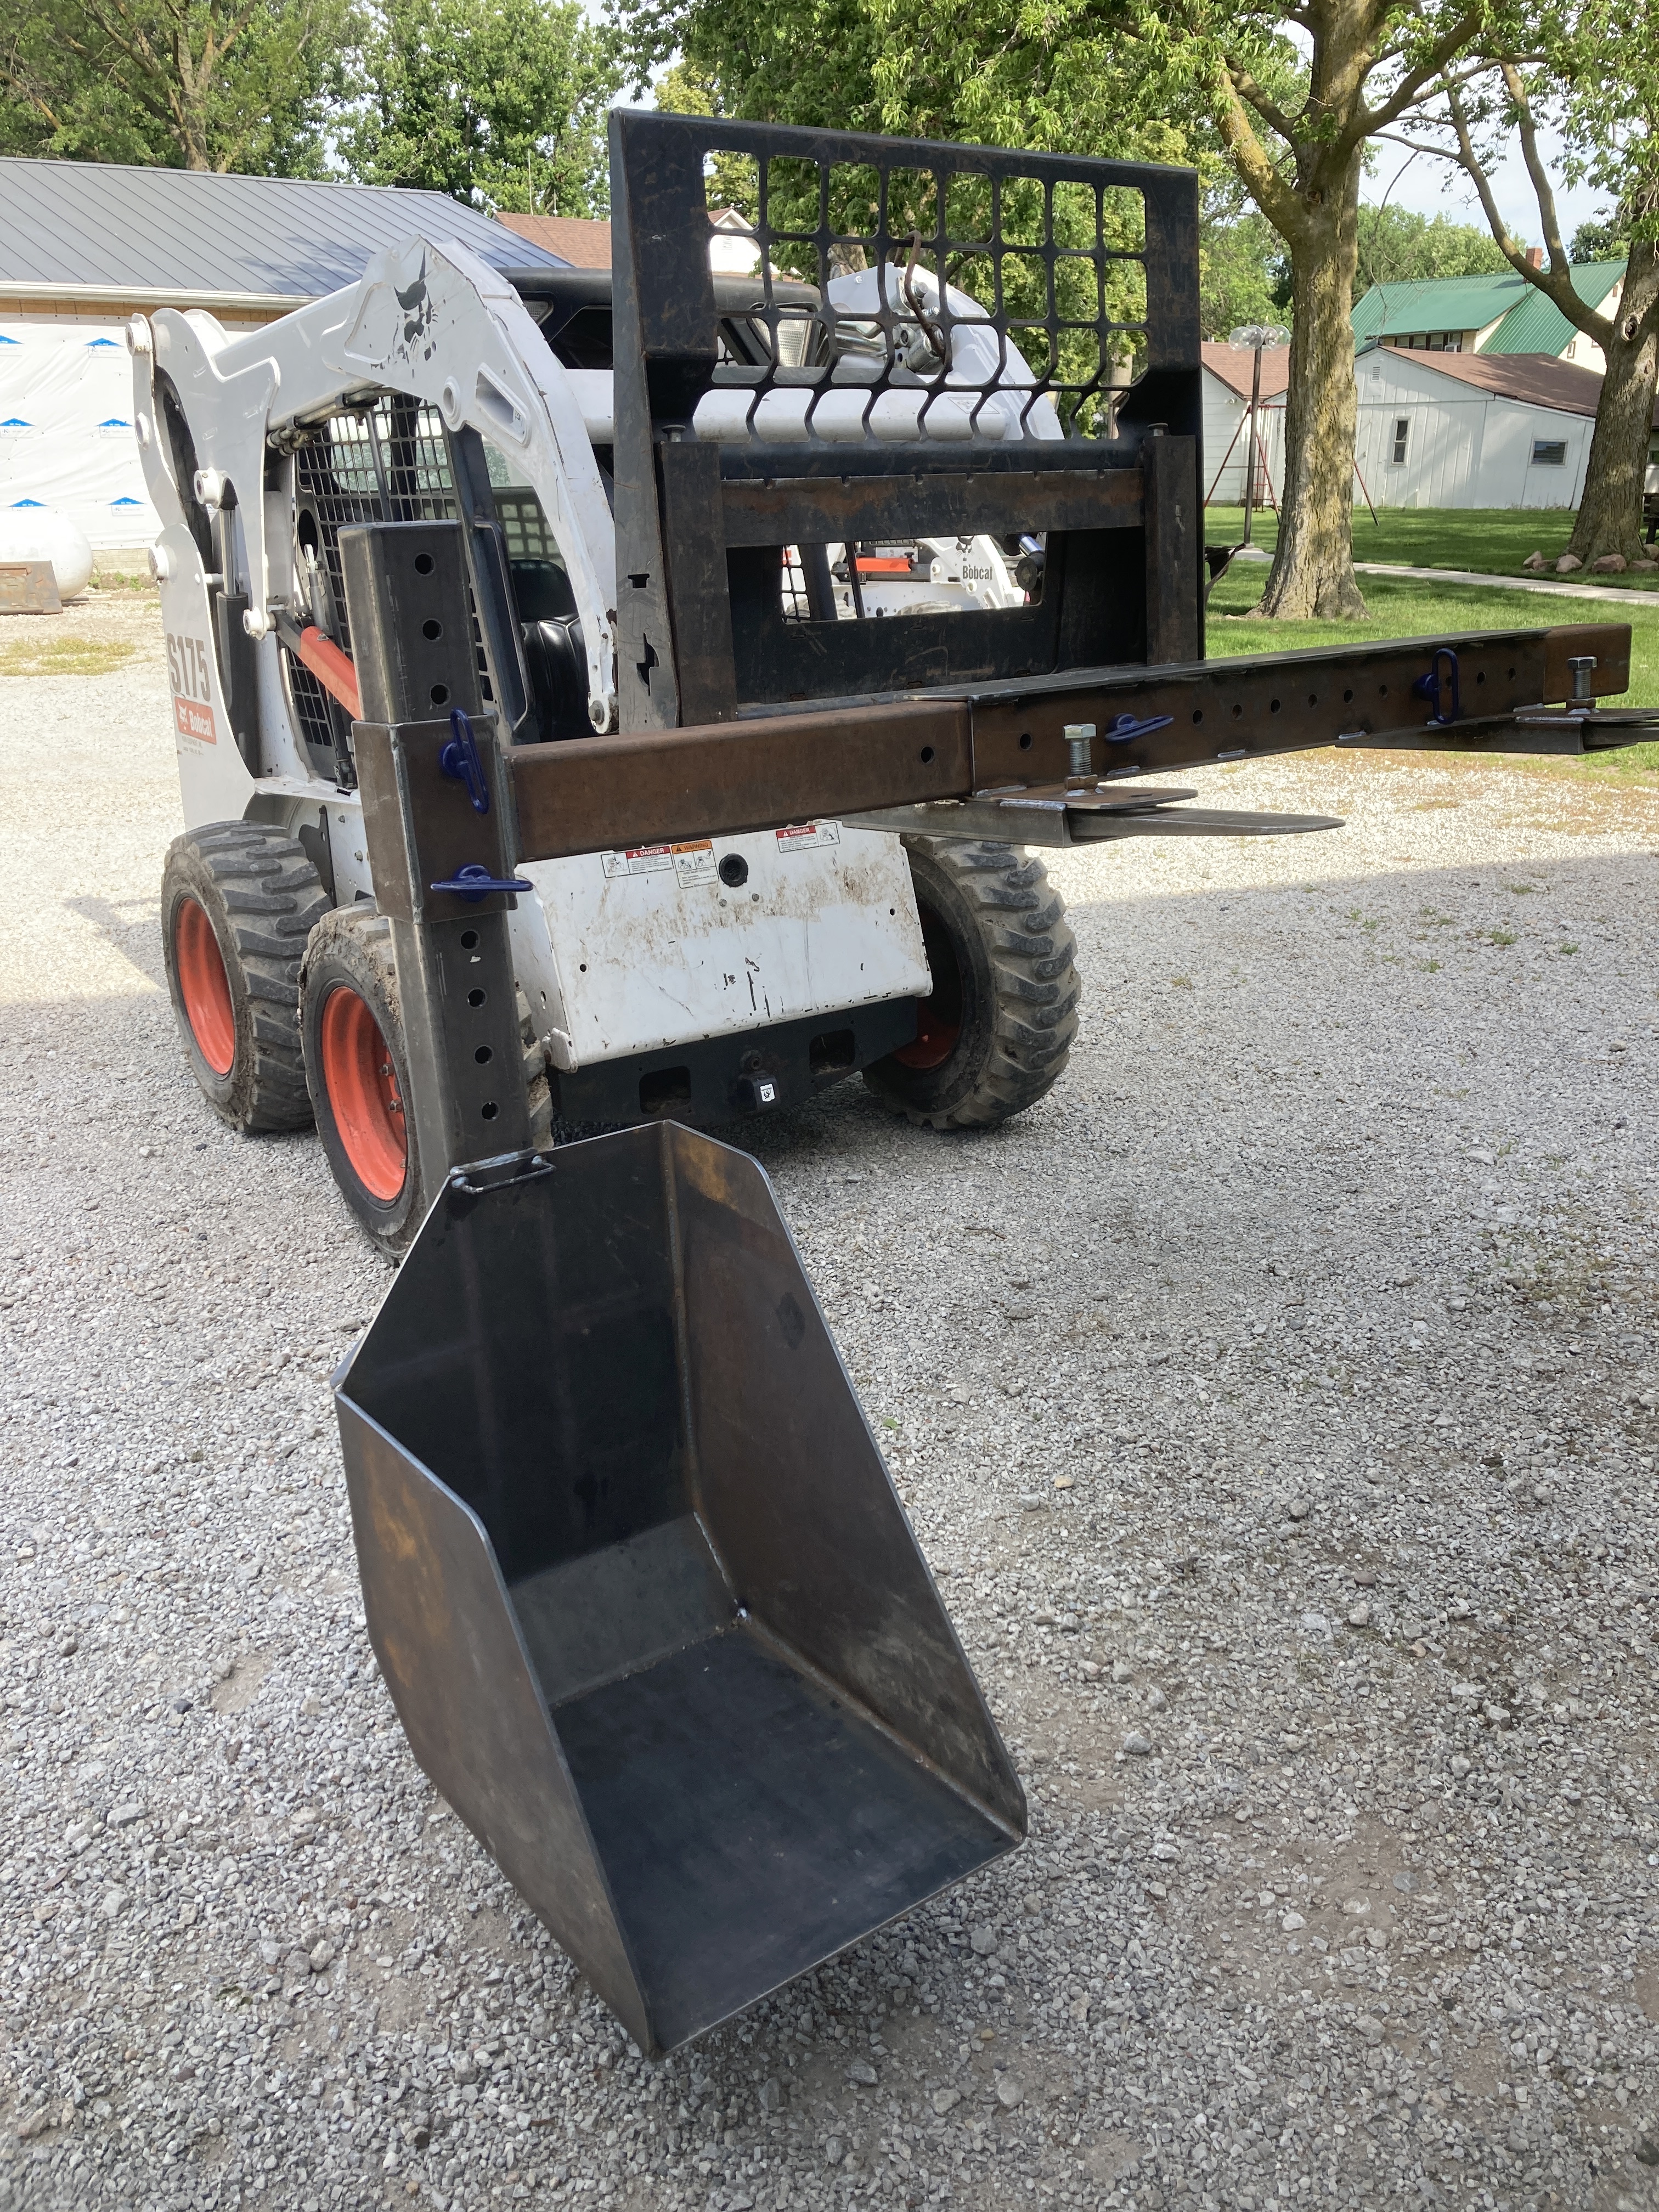 Feed bunk scoop attachment for skid loader